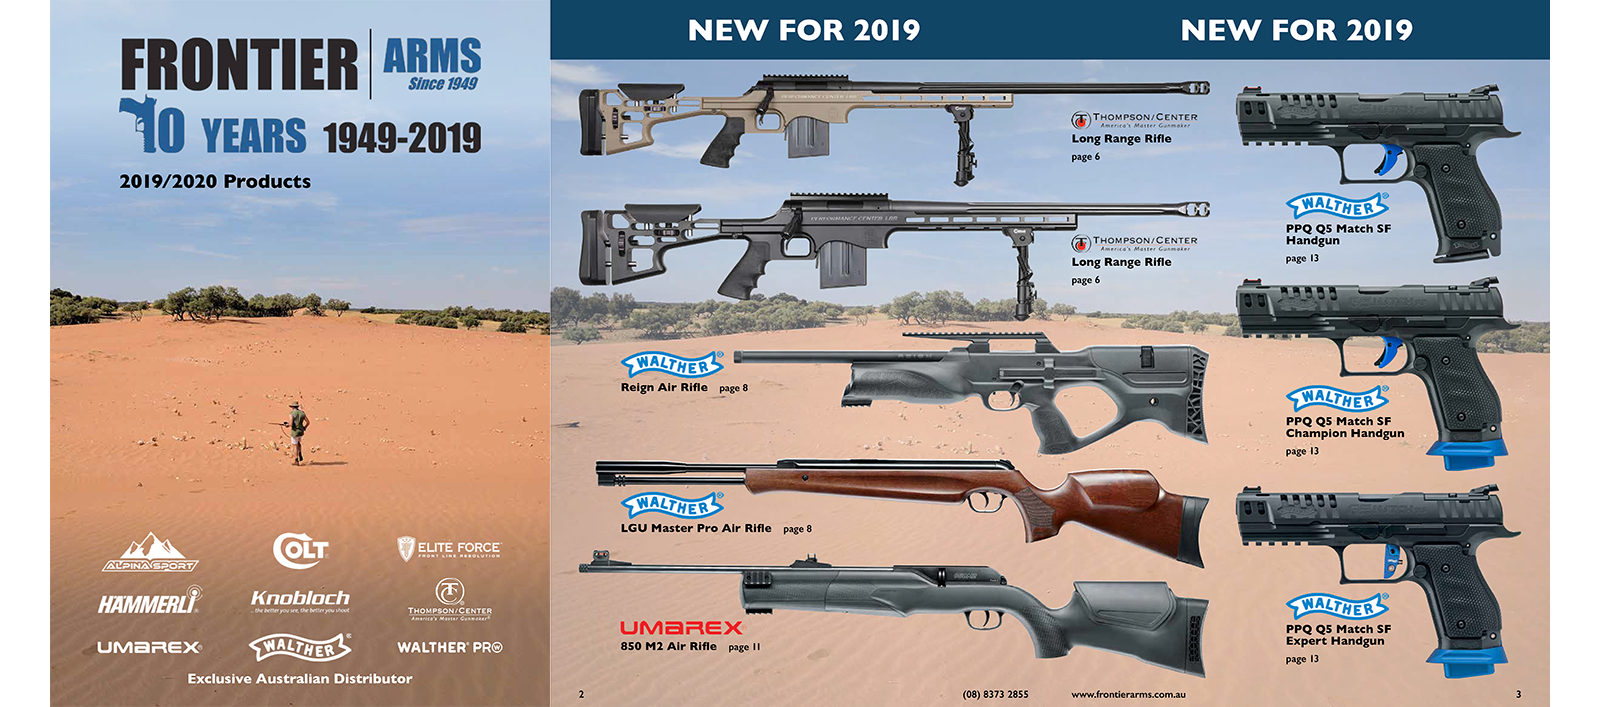 Frontier Arms product catalogue 2019/20